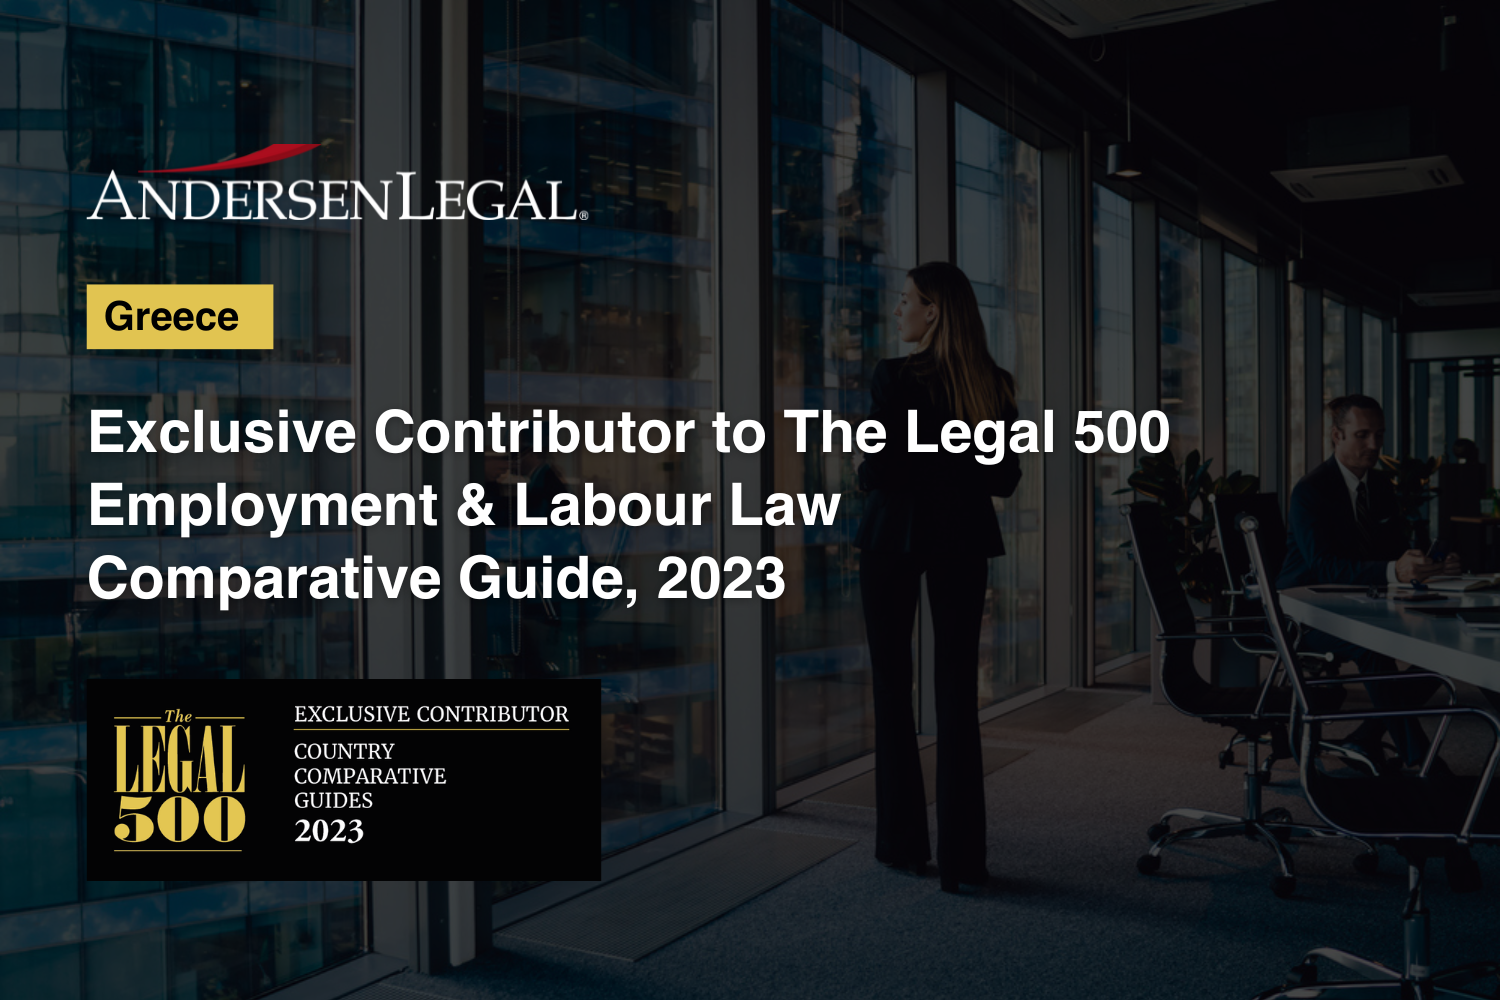 Andersen Legal: Exclusive contributor to The Legal 500 Employment & Labour Law Comparative Guide 2023